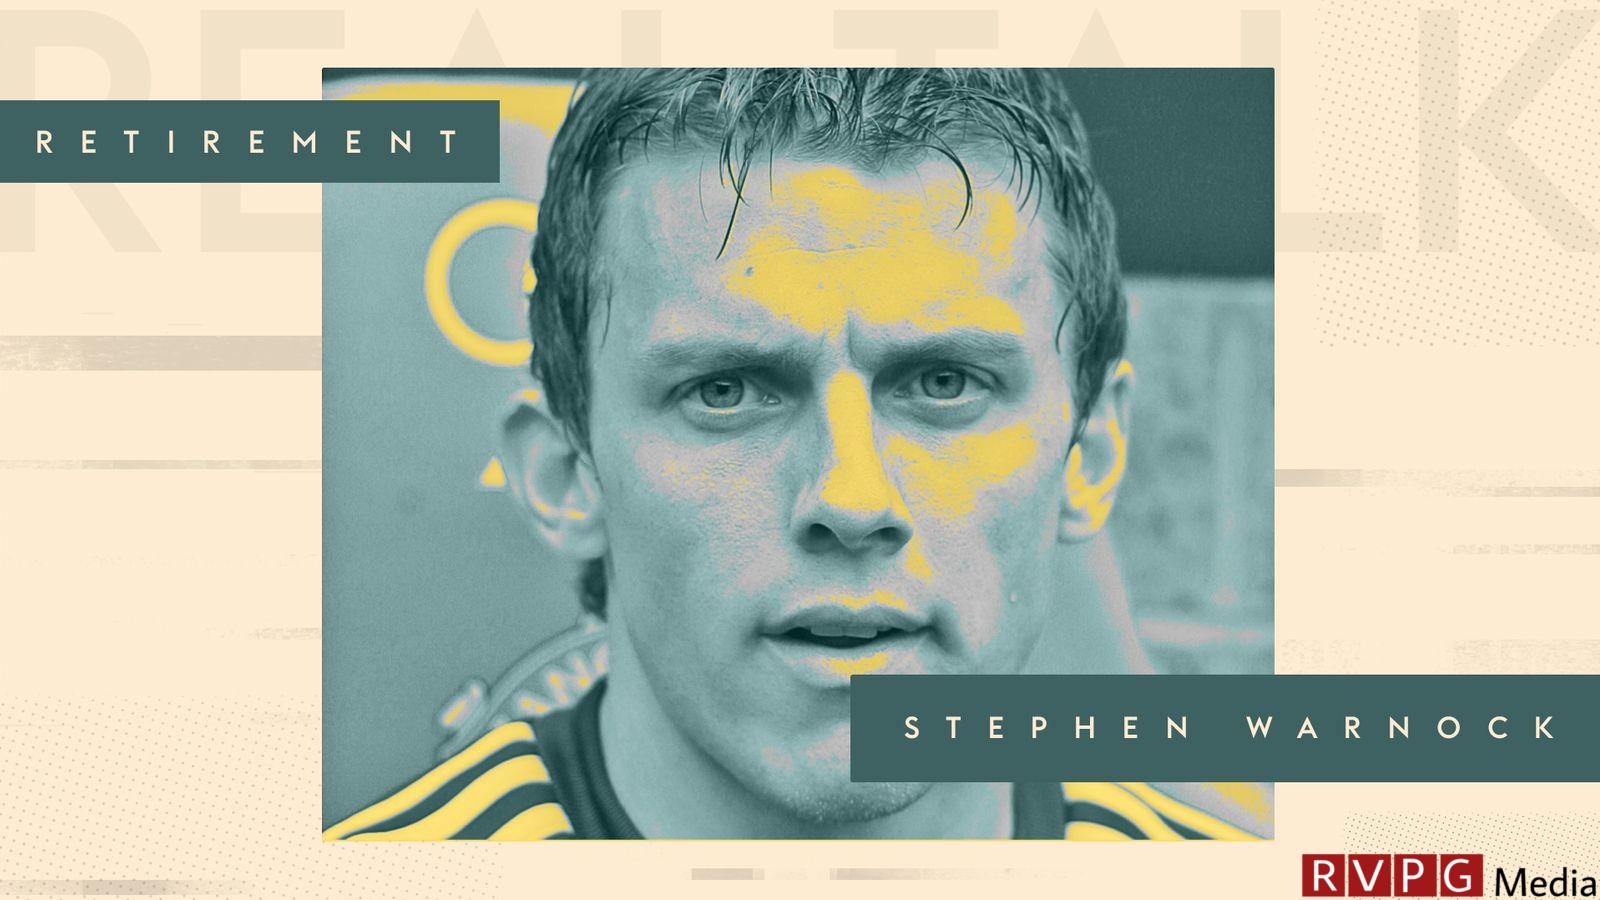 Stephen Warnock on how hard retirement made him reflect on his own life and how things were changing